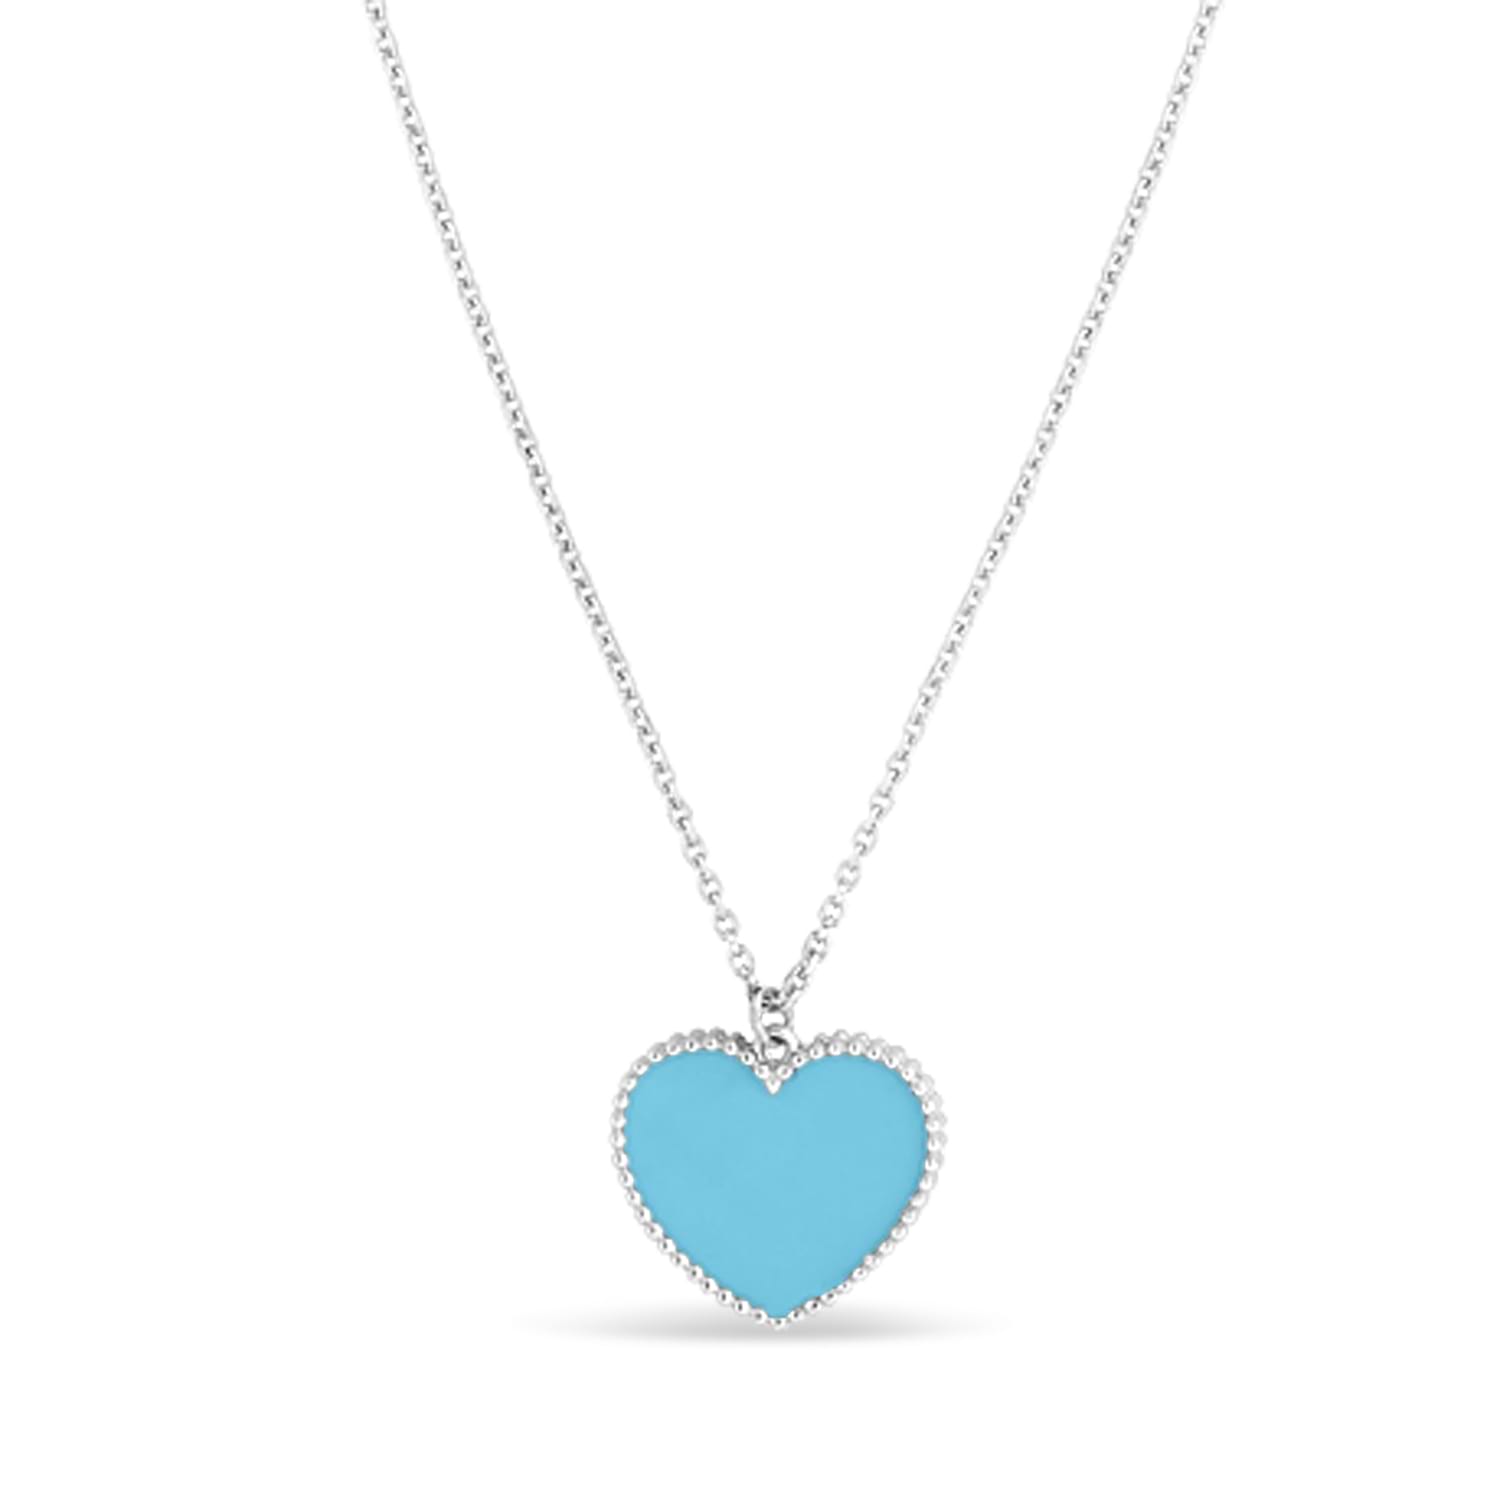 Turquoise Heart Pendant Necklace 14k White Gold